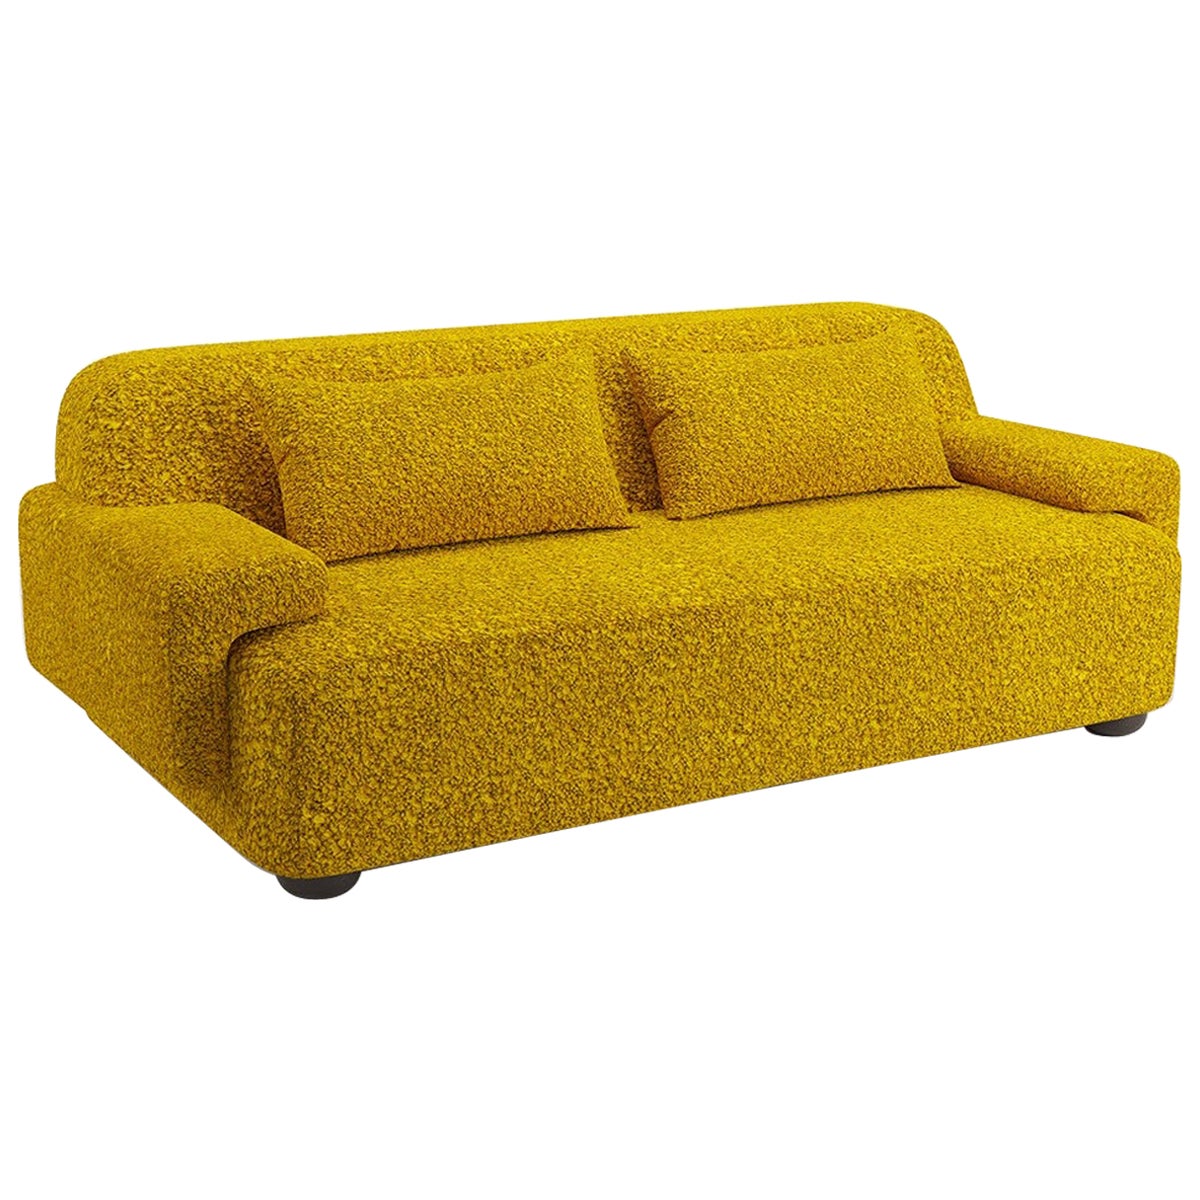 Popus Editions Lena 4 Seater Sofa in Amber Athena Loop Yarn Upholstery For Sale